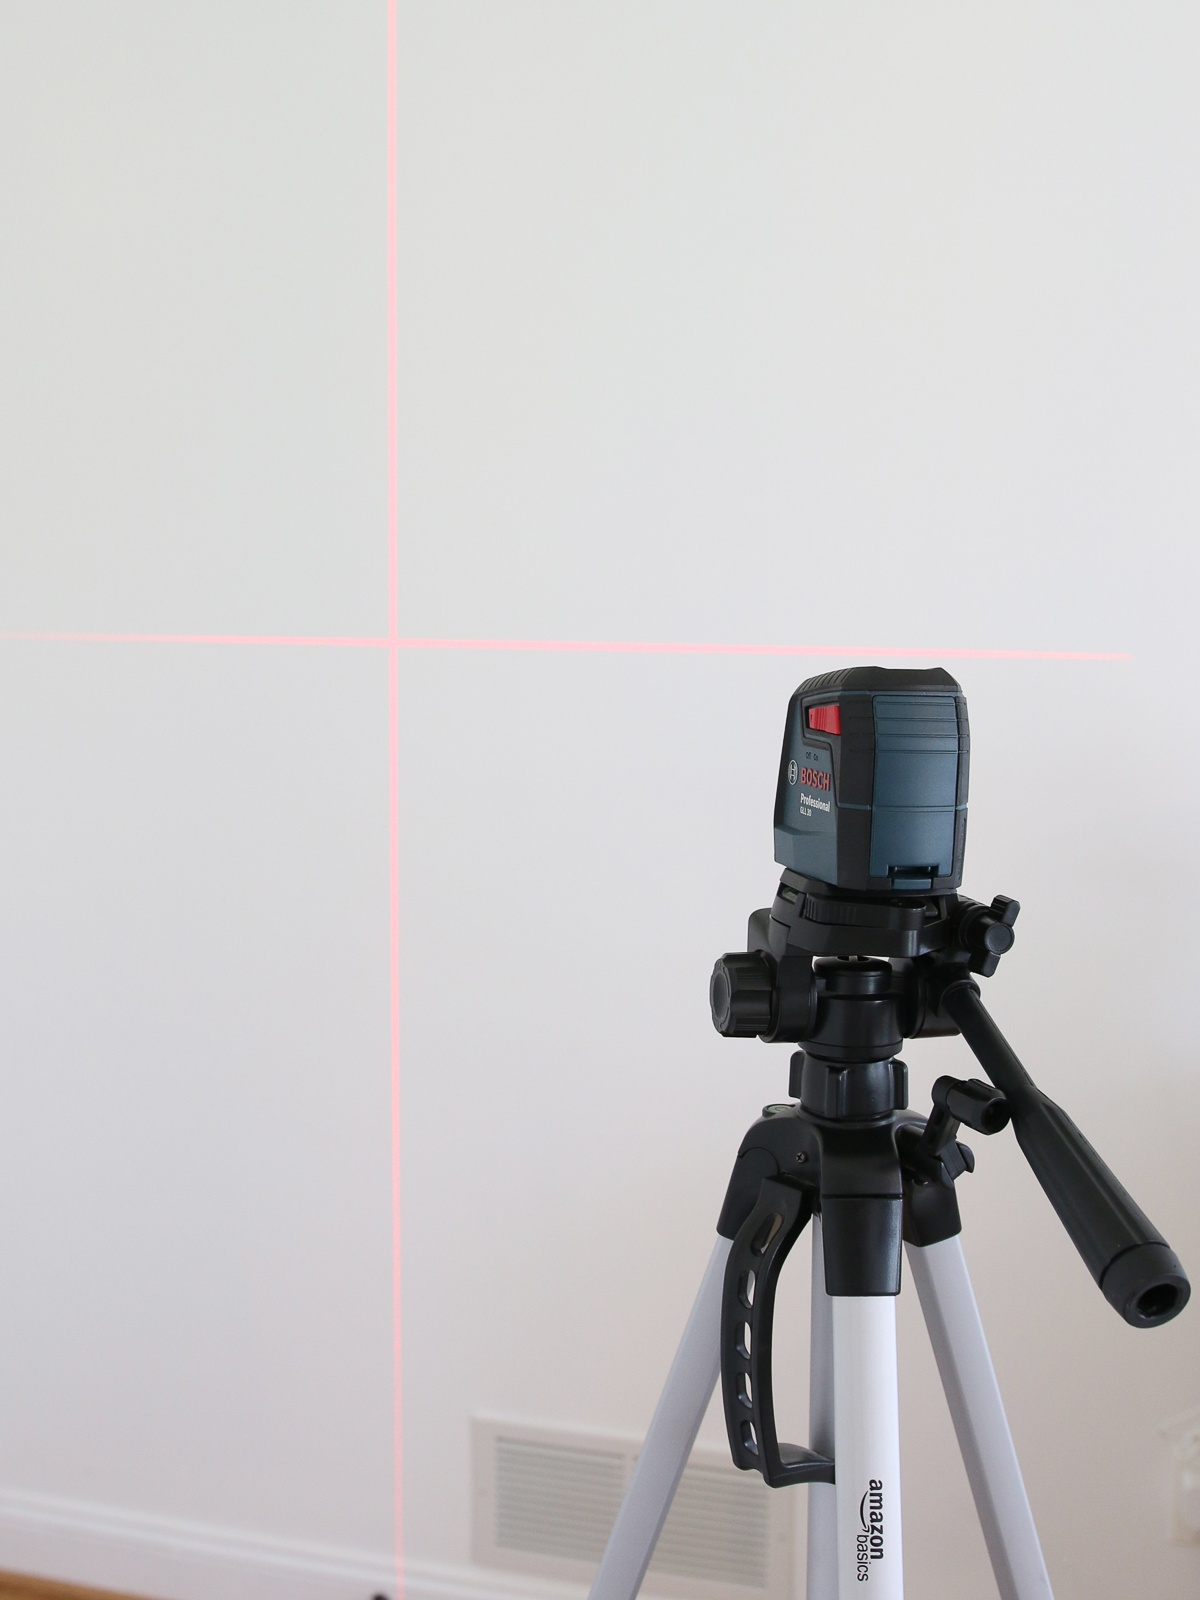 Laser level on a tripod creating a plumb and level line on a white wall